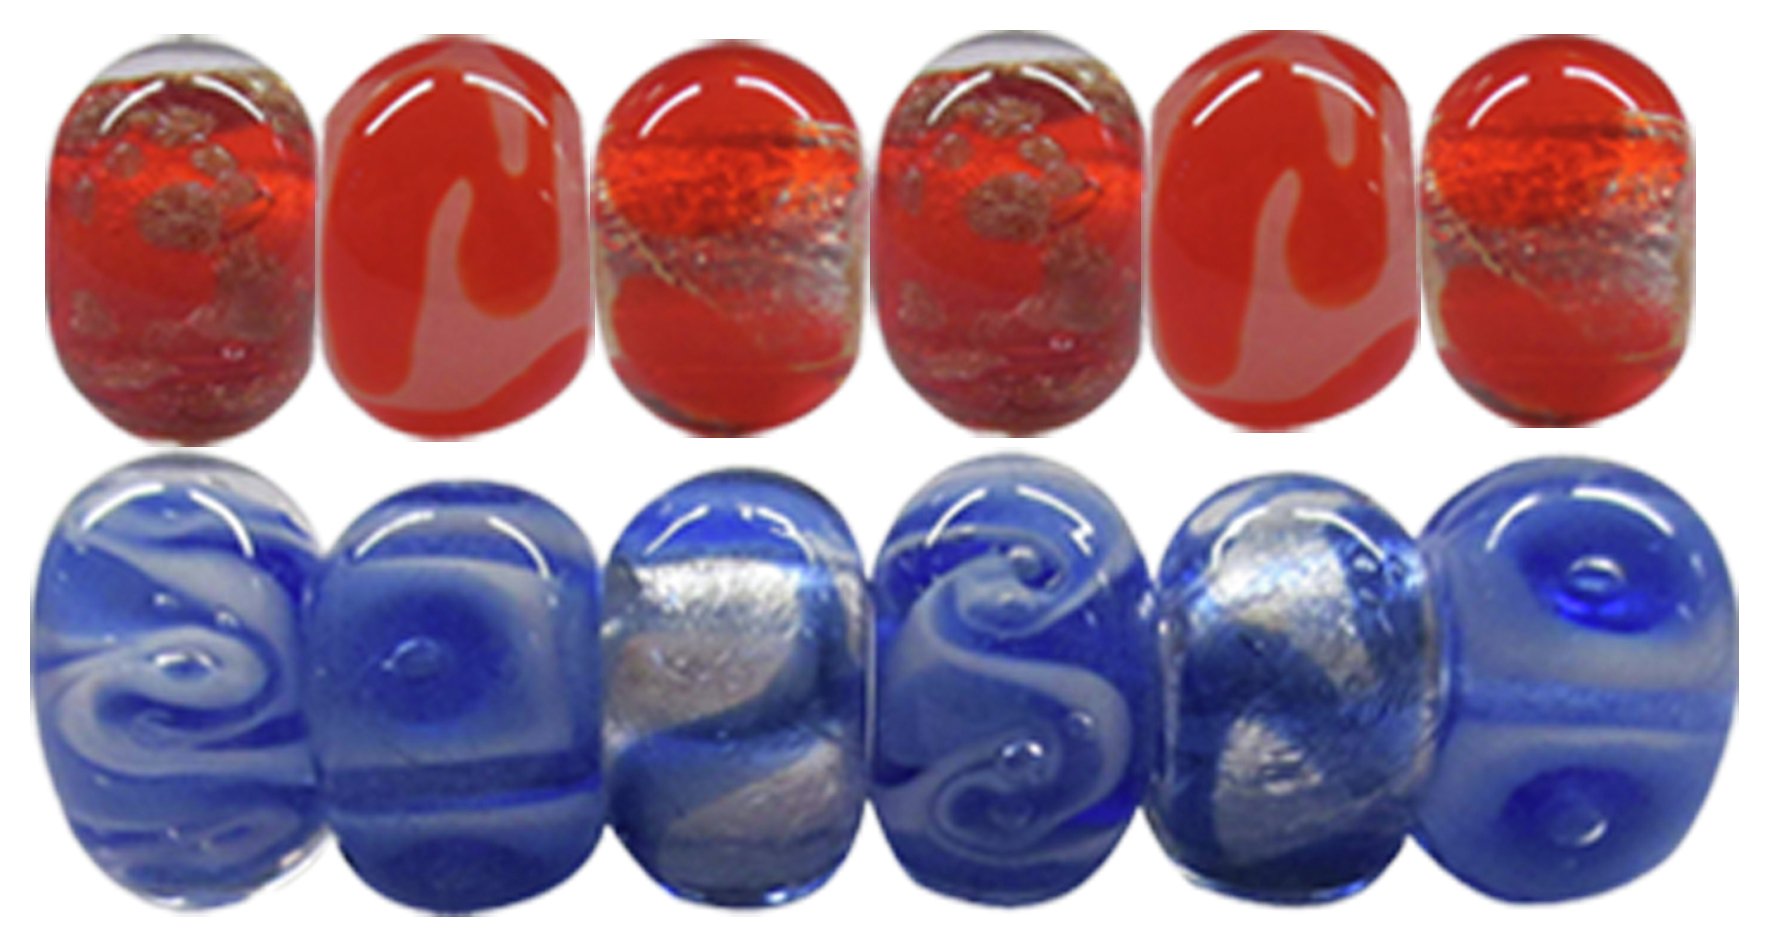 Kids Red and Blue Bead Assortment - Set of 12.